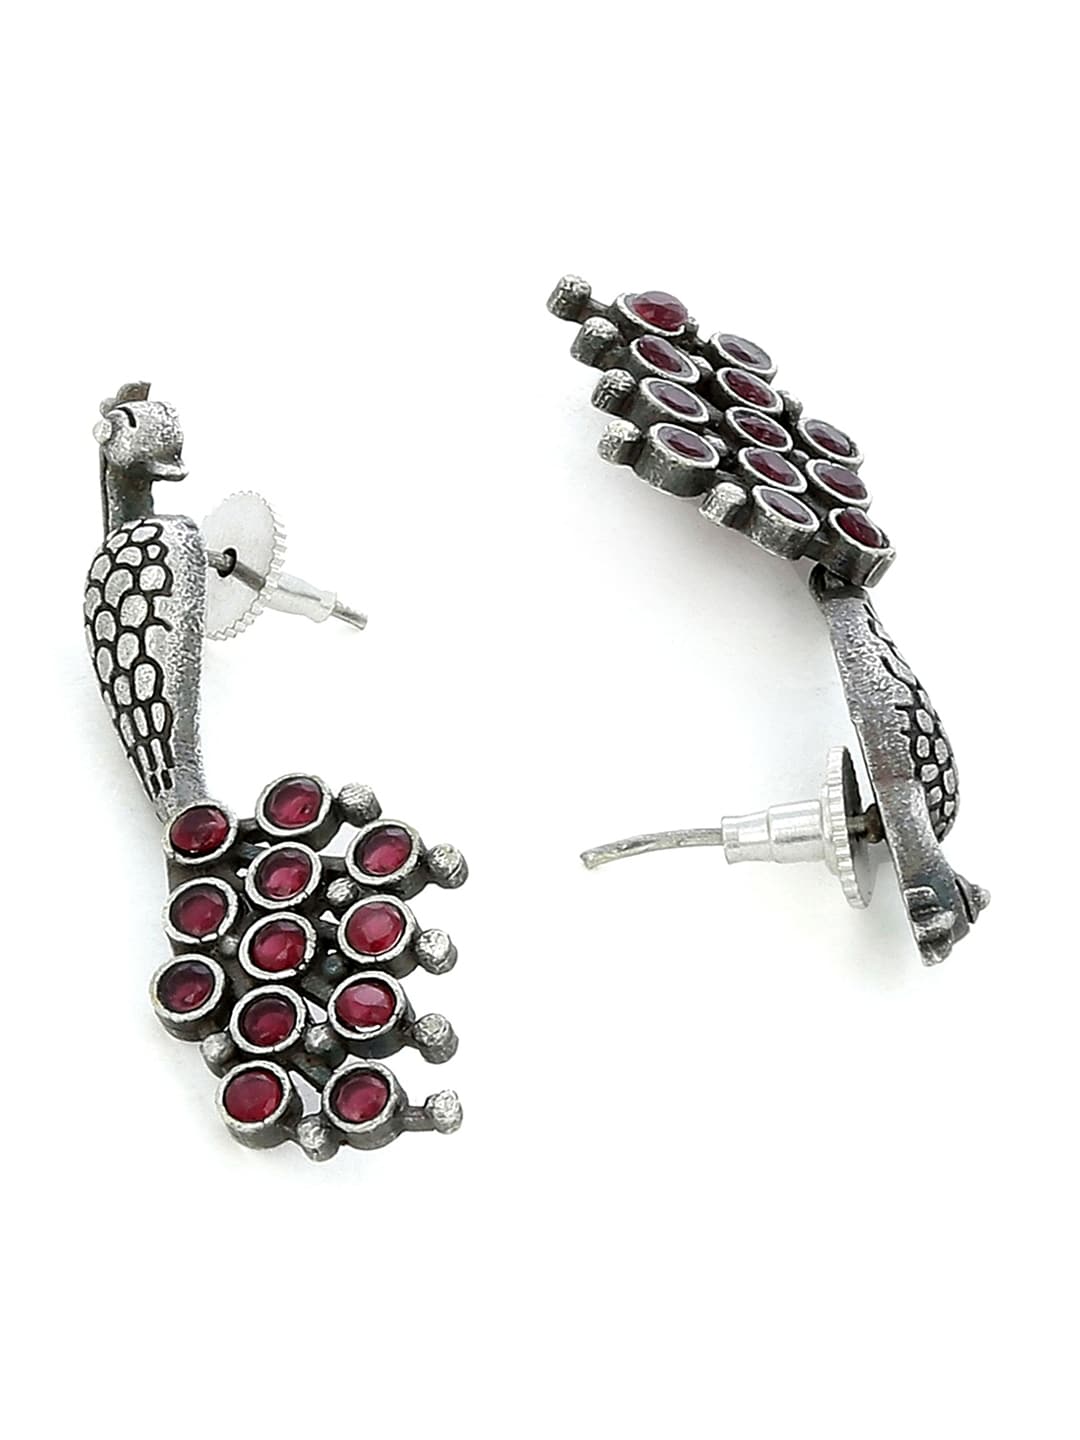 EL REGALO Silver & Red Peacock Shaped Oxidised Drop Earrings - for Women and Girls
Style ID: 16991460